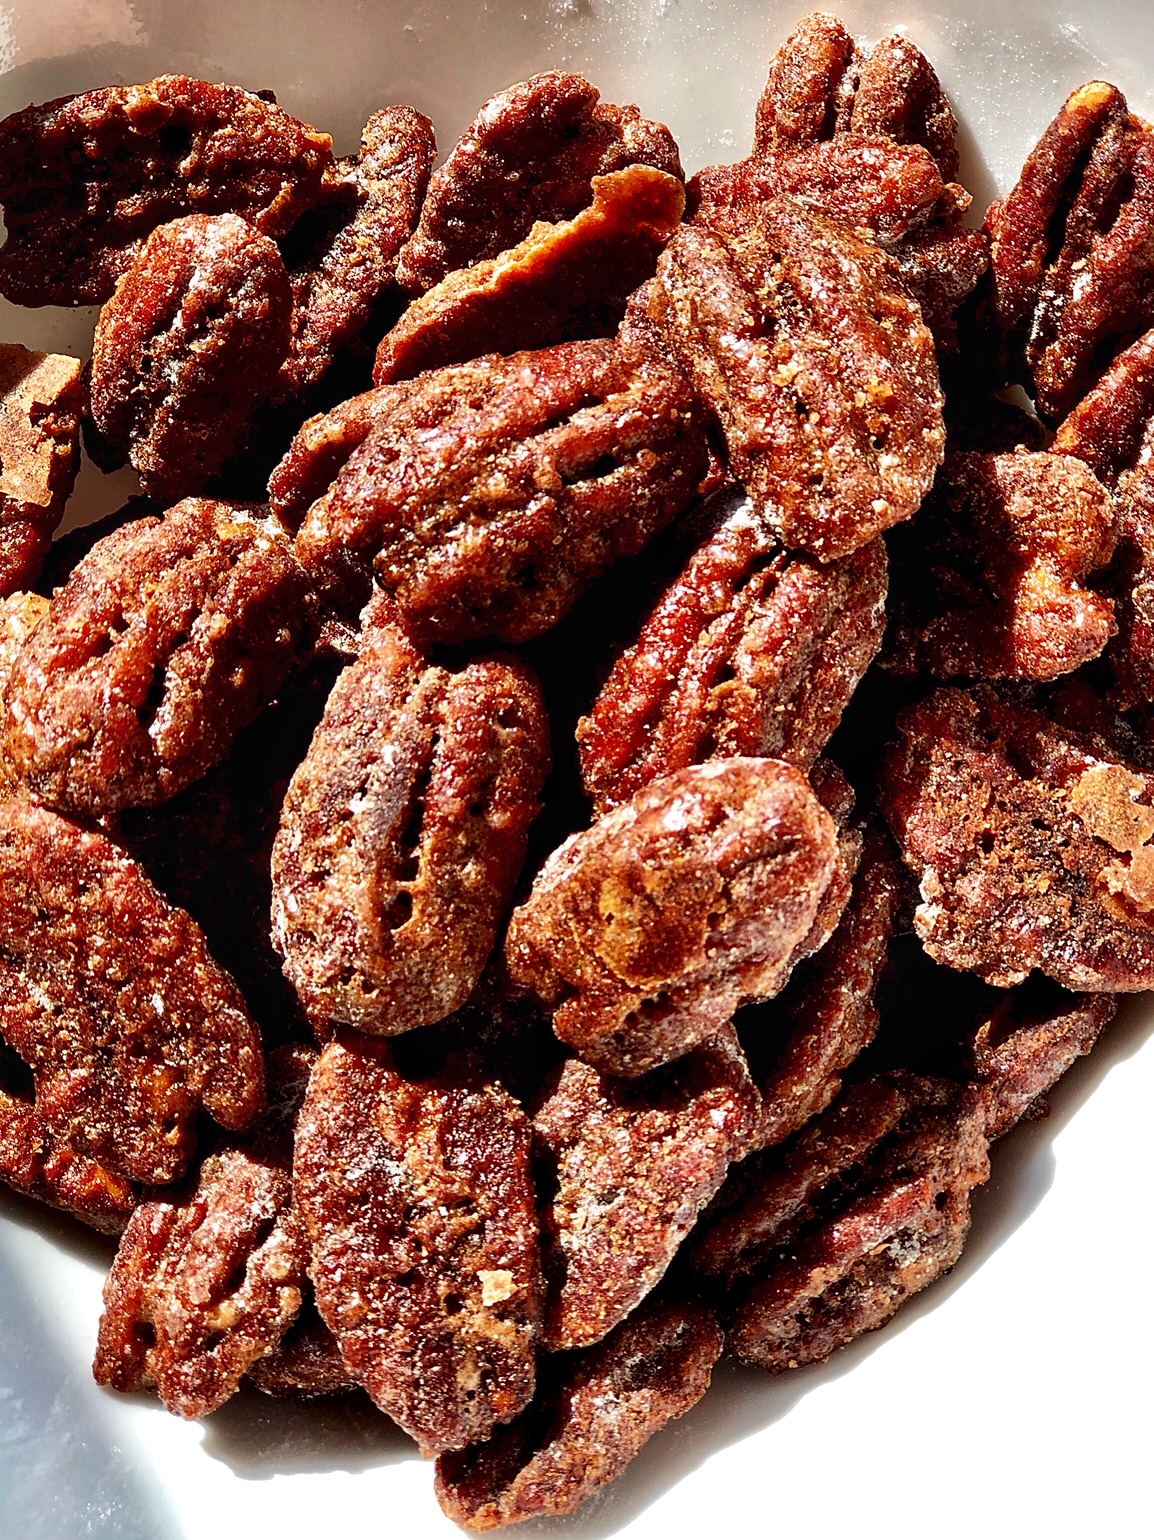 Keto-Friendly \"Candied\" Nuts